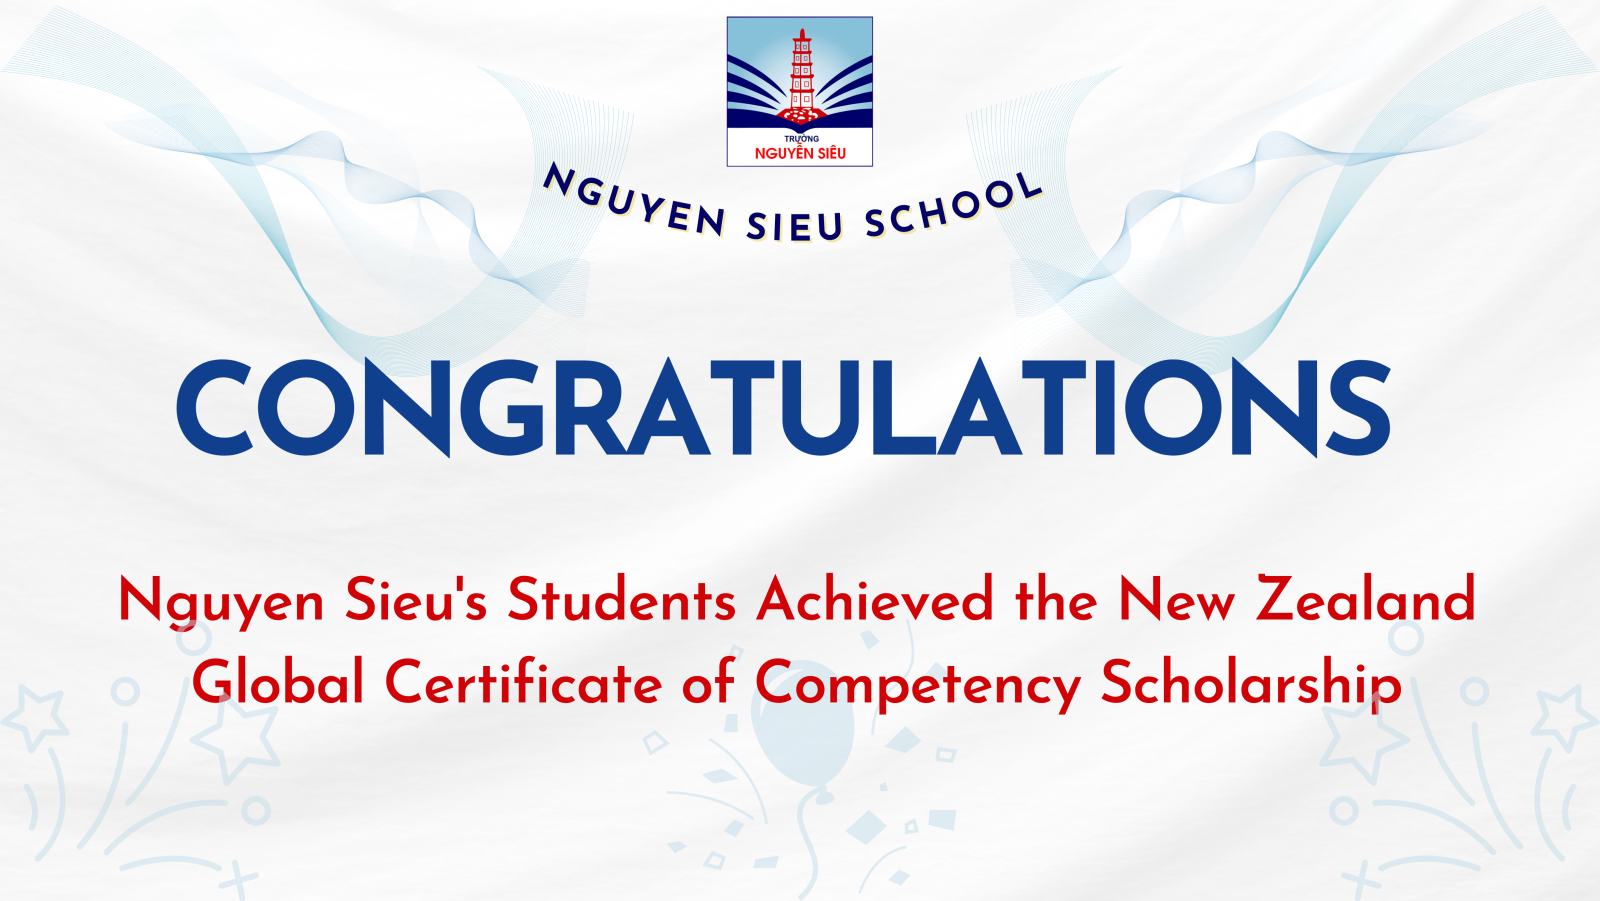 Students Achieved the New Zealand Global Certificate of Competency Scholarship